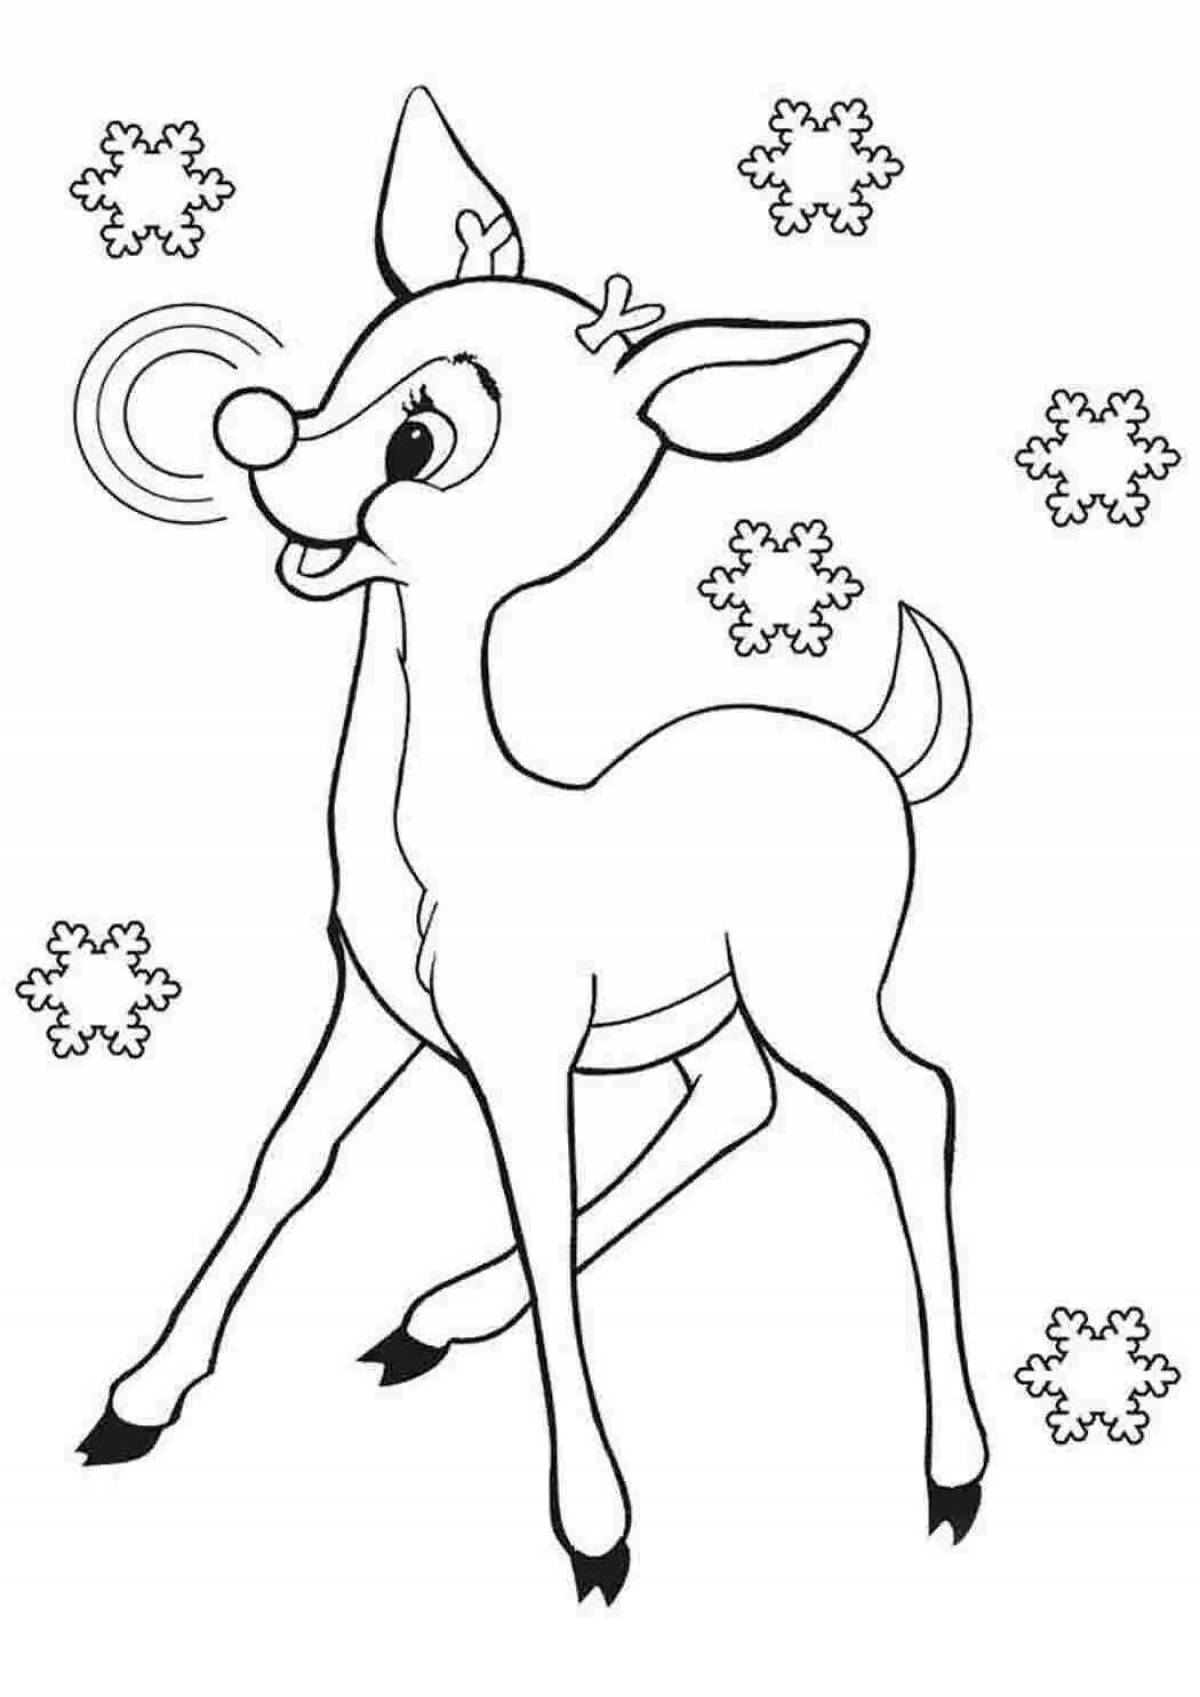 Crazy deer coloring pages for kids